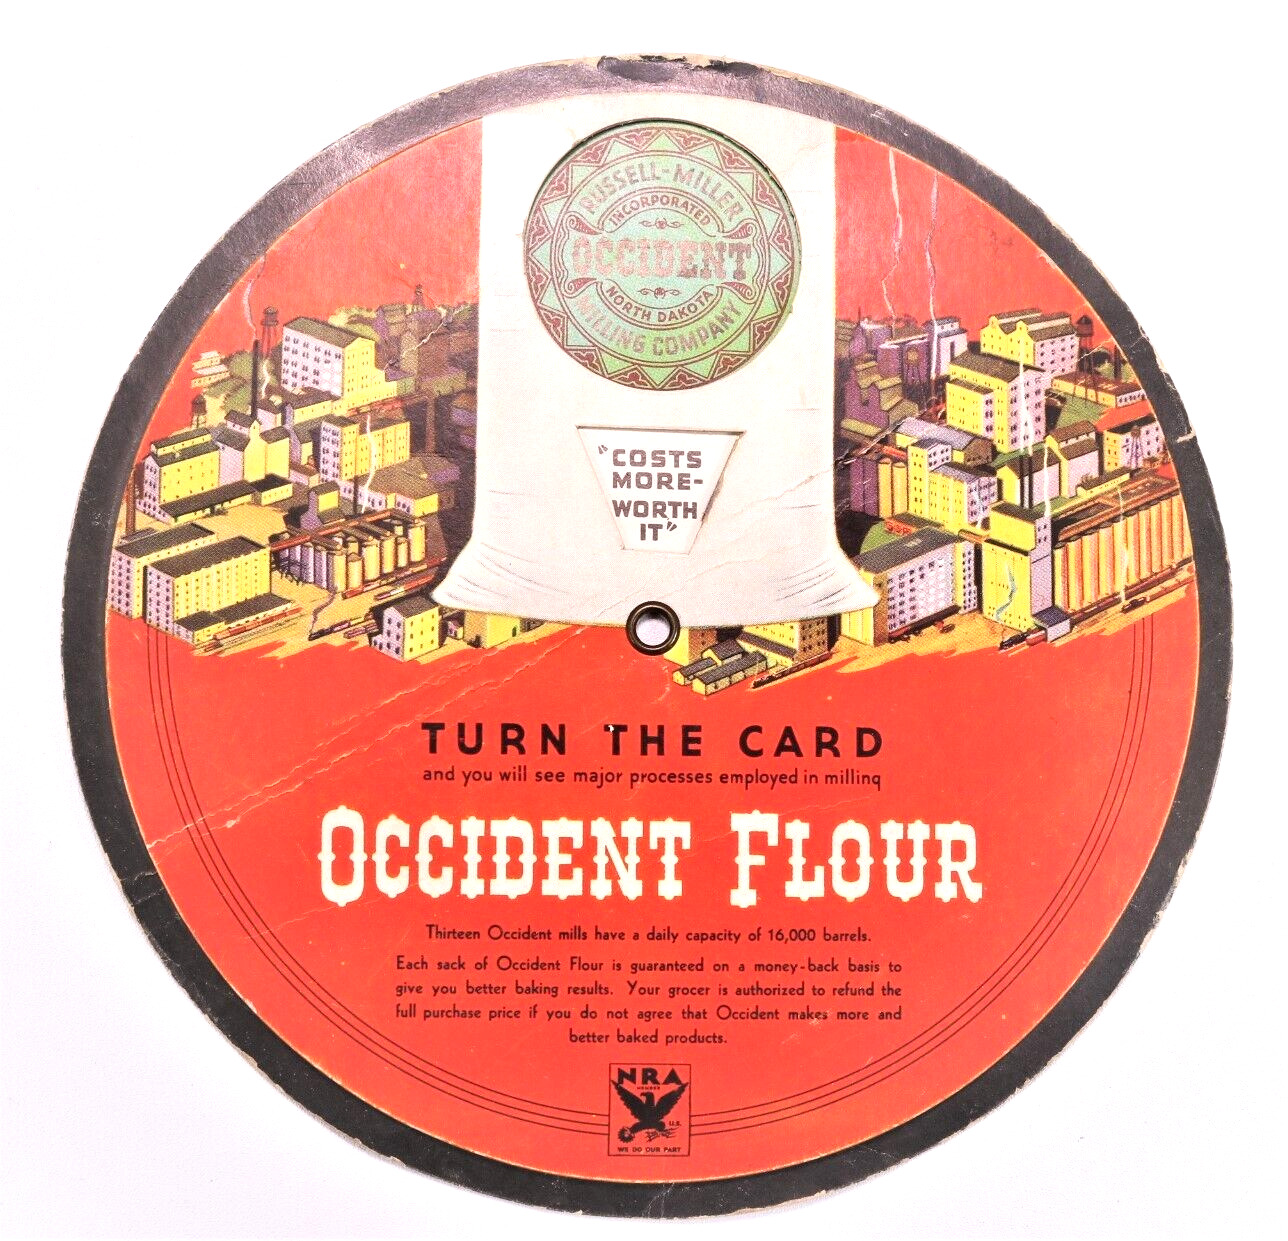 1930s Occident Flour Advertising with Unique NRA Logo Appearance